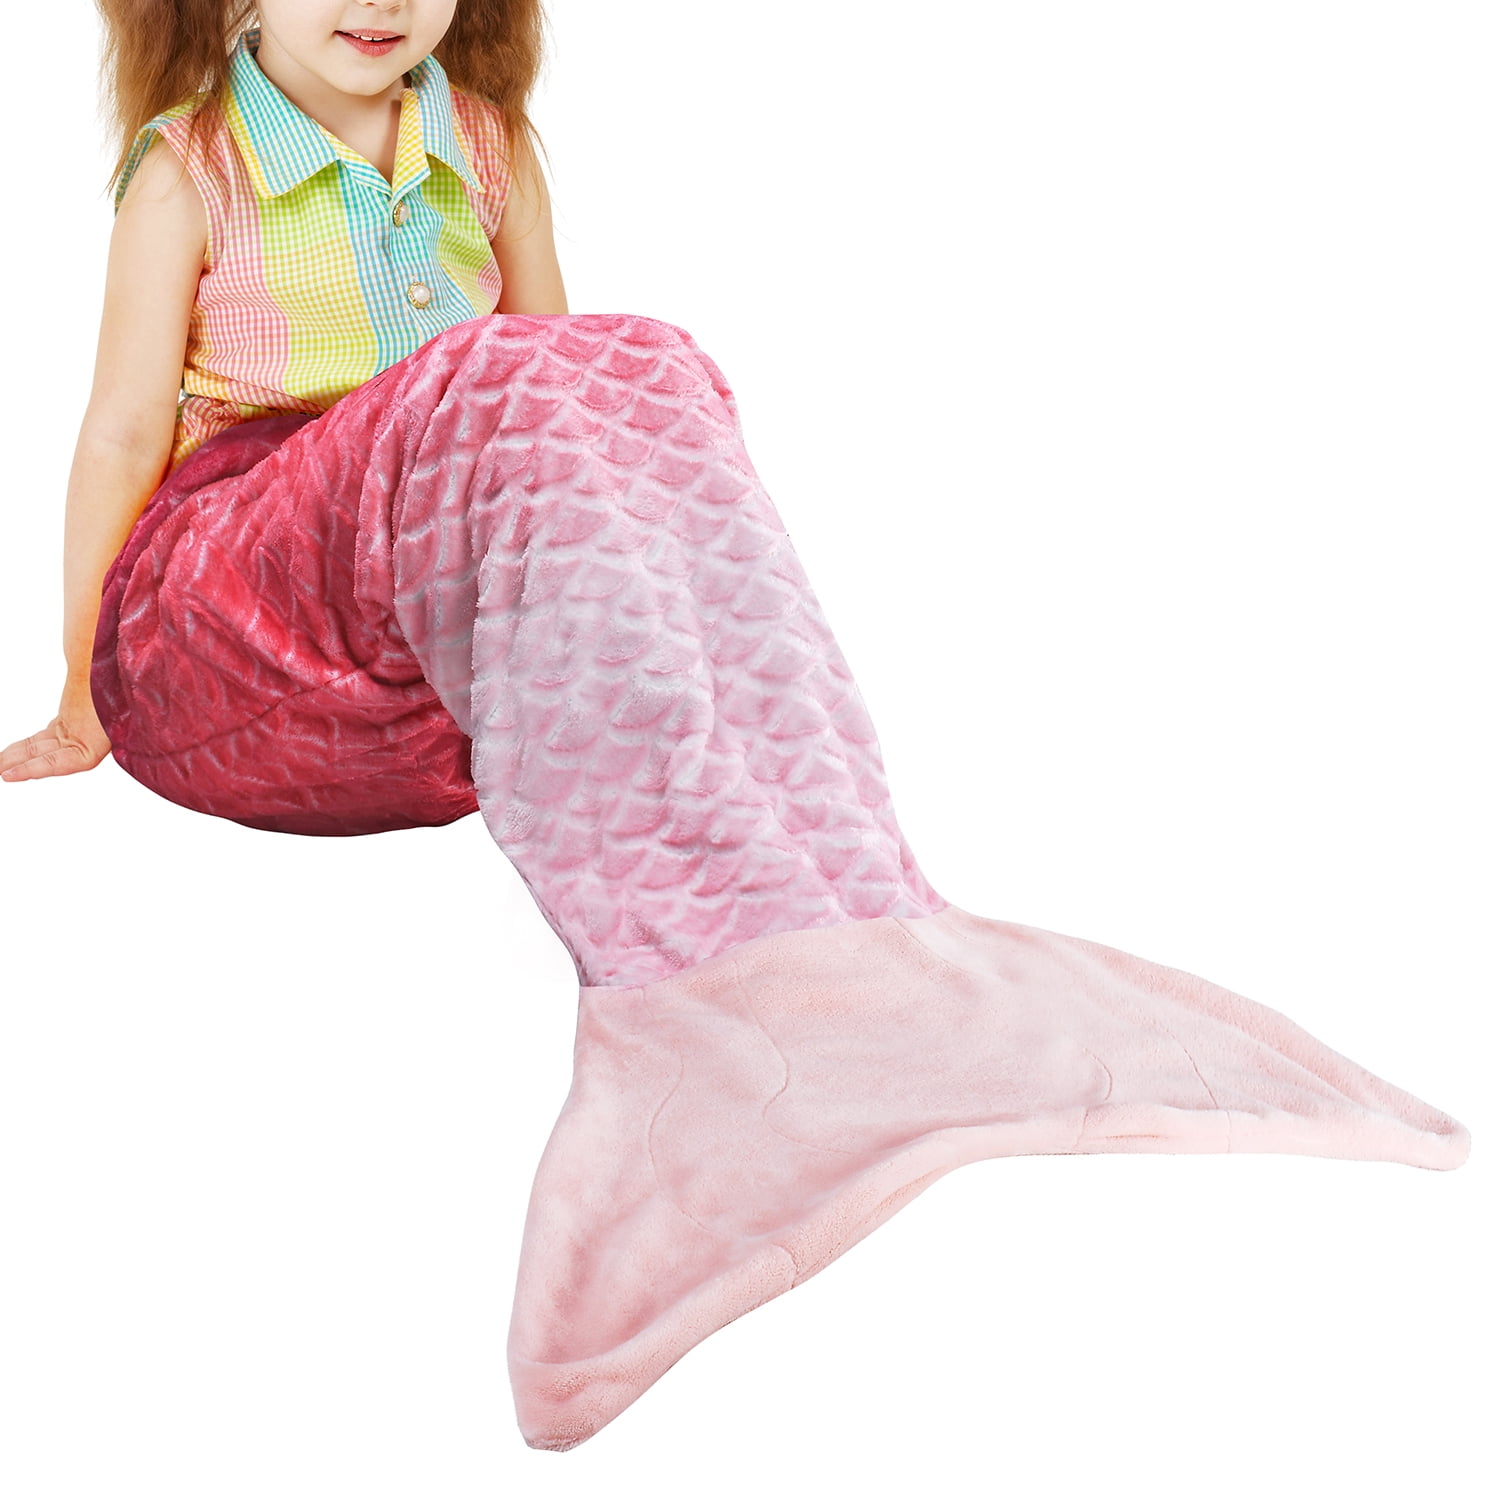 Personalised Mermaid Tail Blankets UK Seller Shipped From the UK Kids Adult Gift 